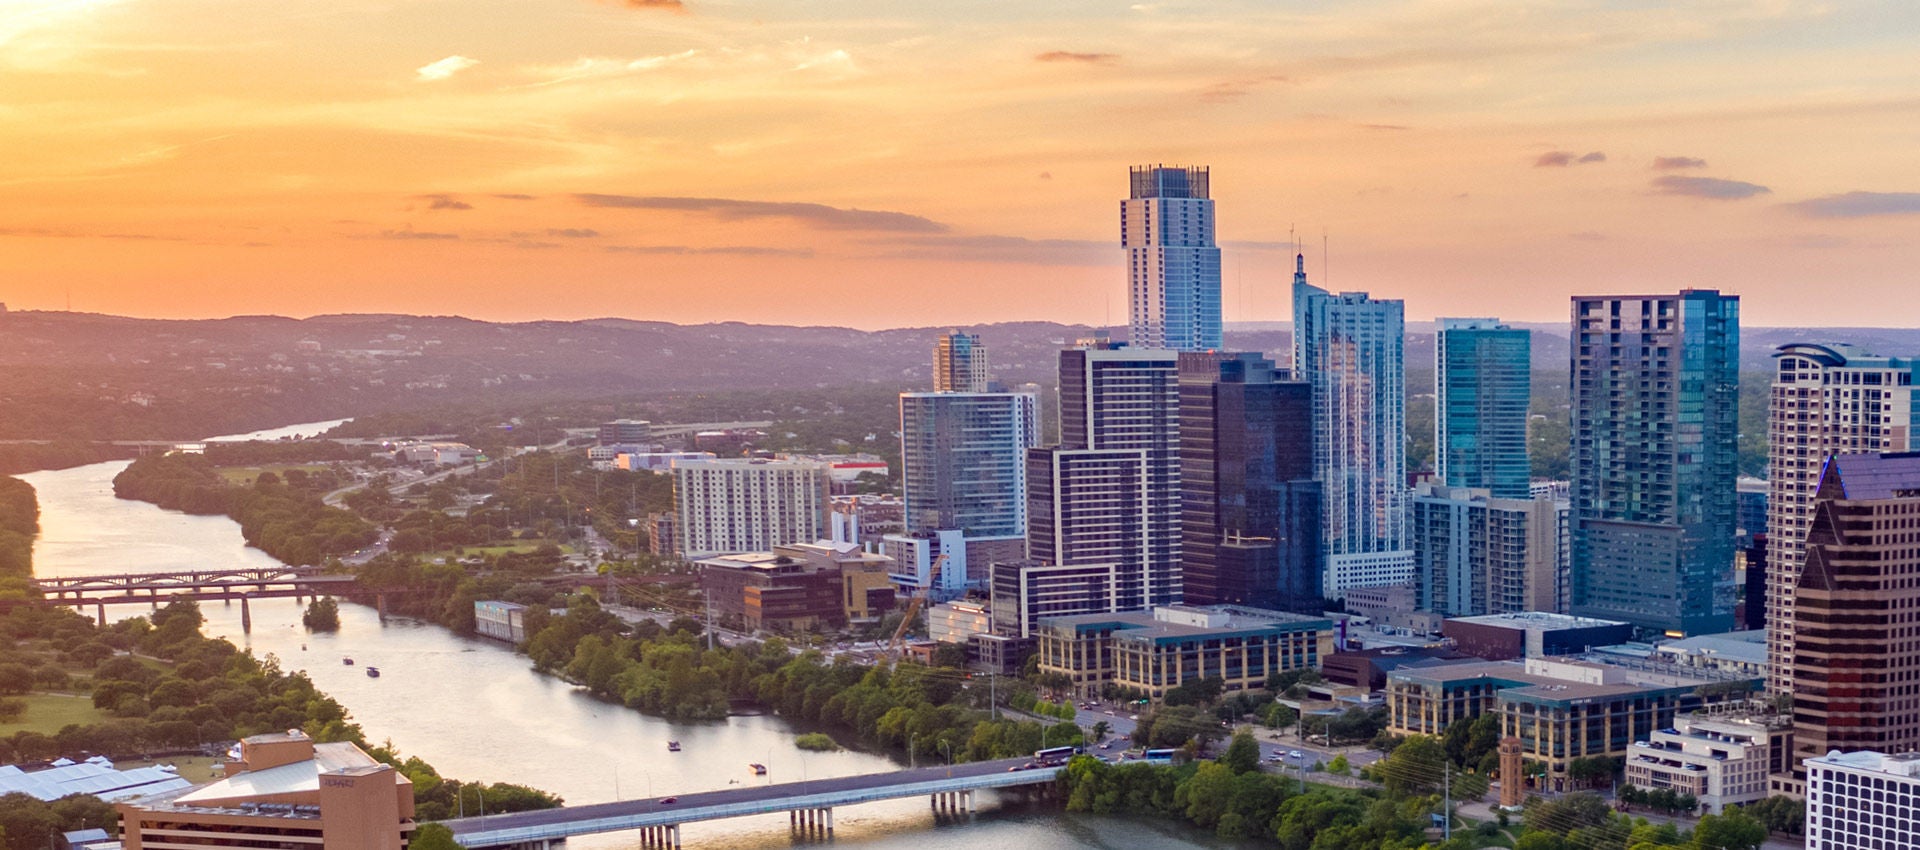 The sun sets on the Colorado River and the city of Austin, Texas.